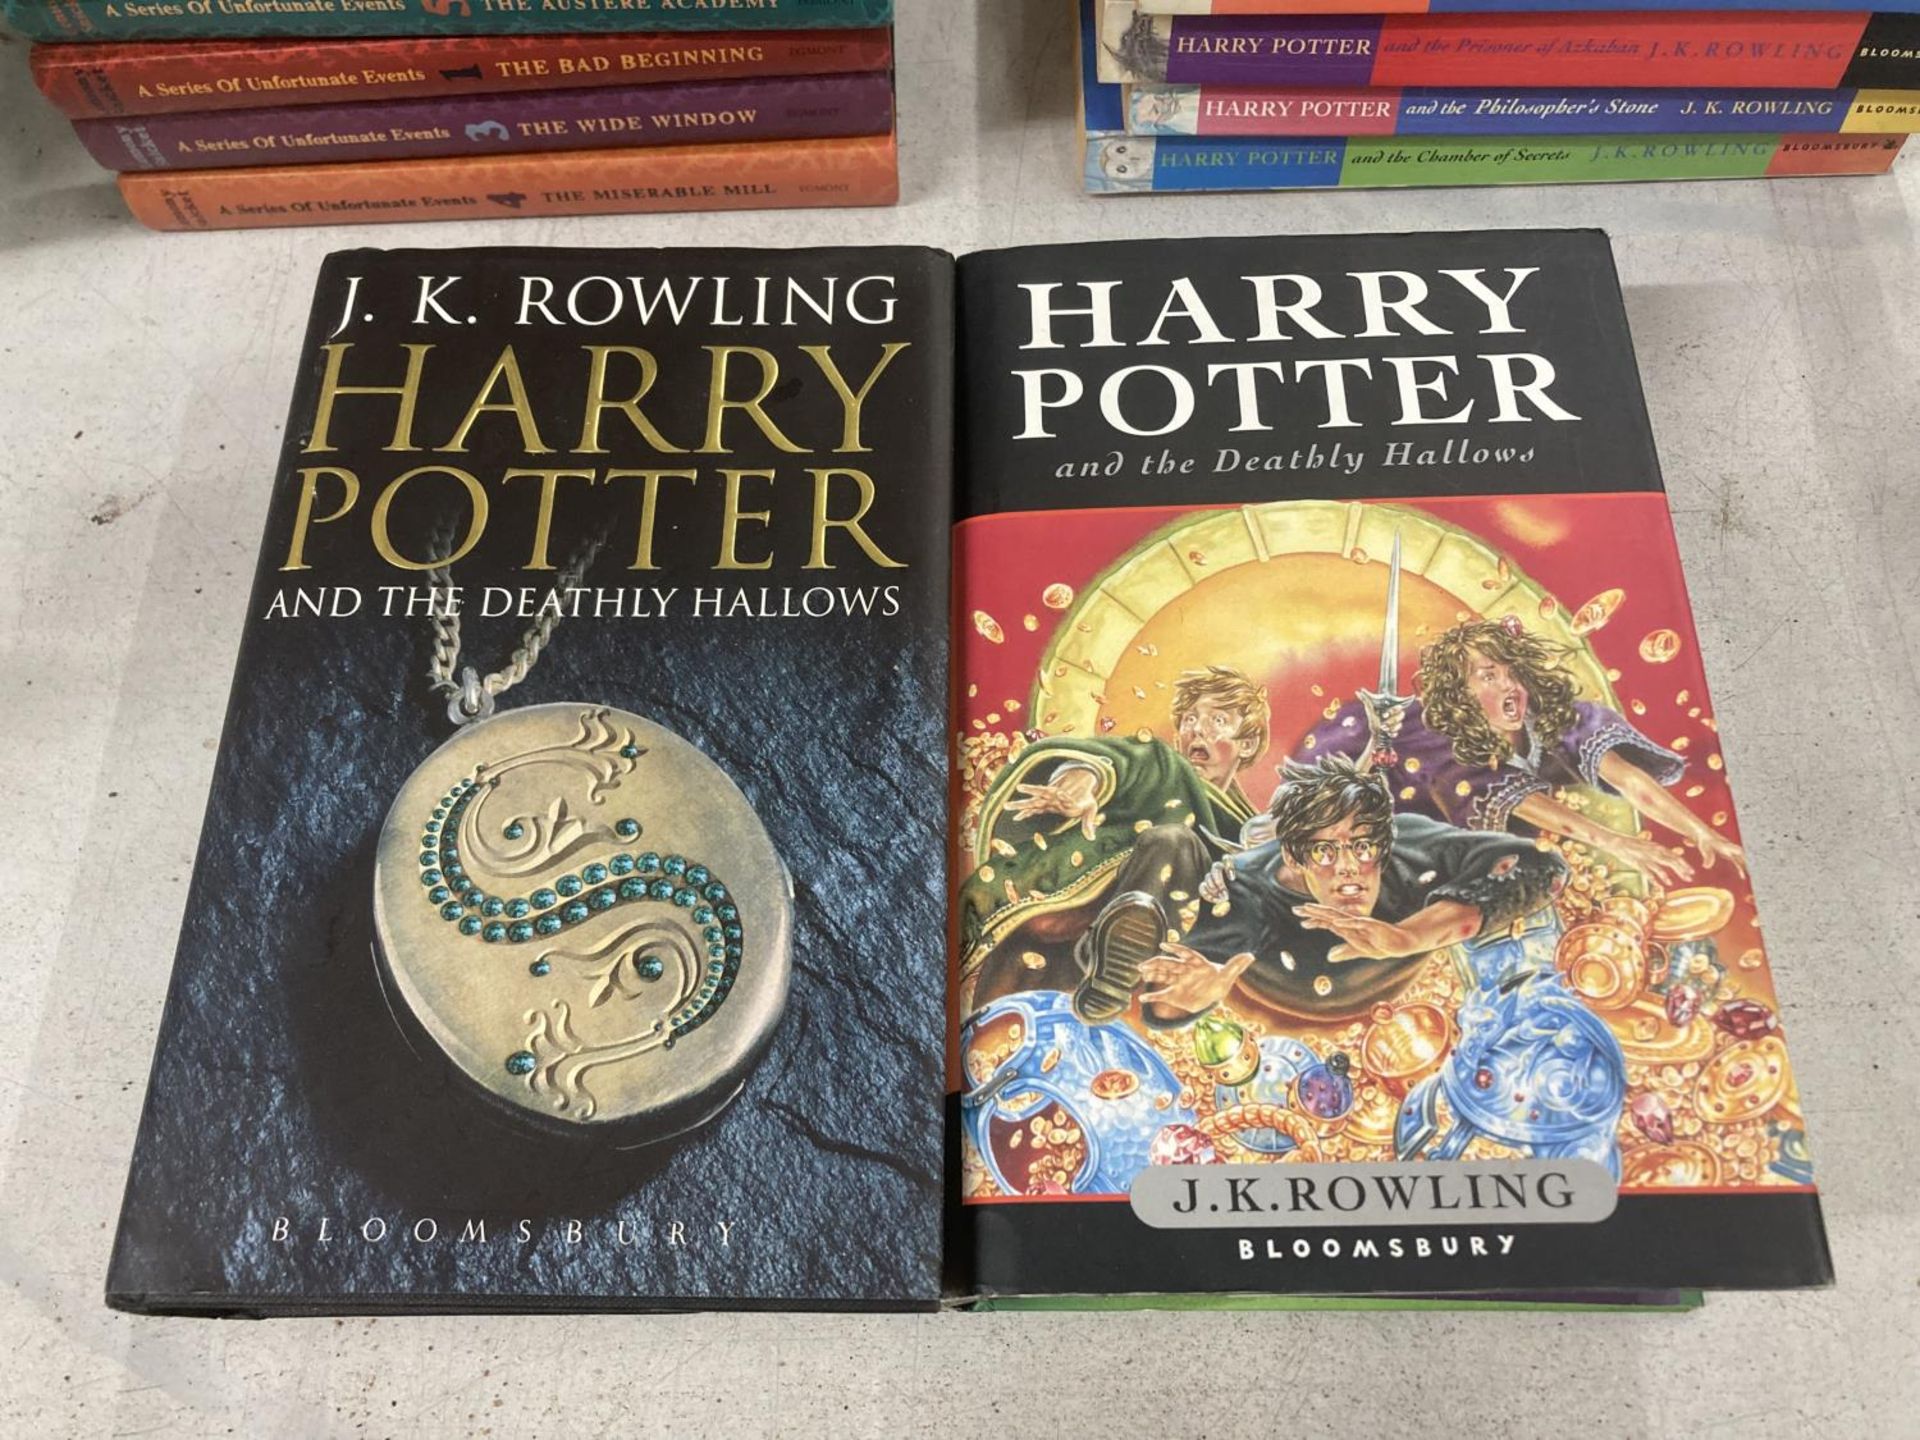 TWO FIRST EDITION HARDBACKS HARRY POTTER AND THE DEATHLY HALLOWS BY J.K ROWLING WITH DUSTOCVERS BOTH